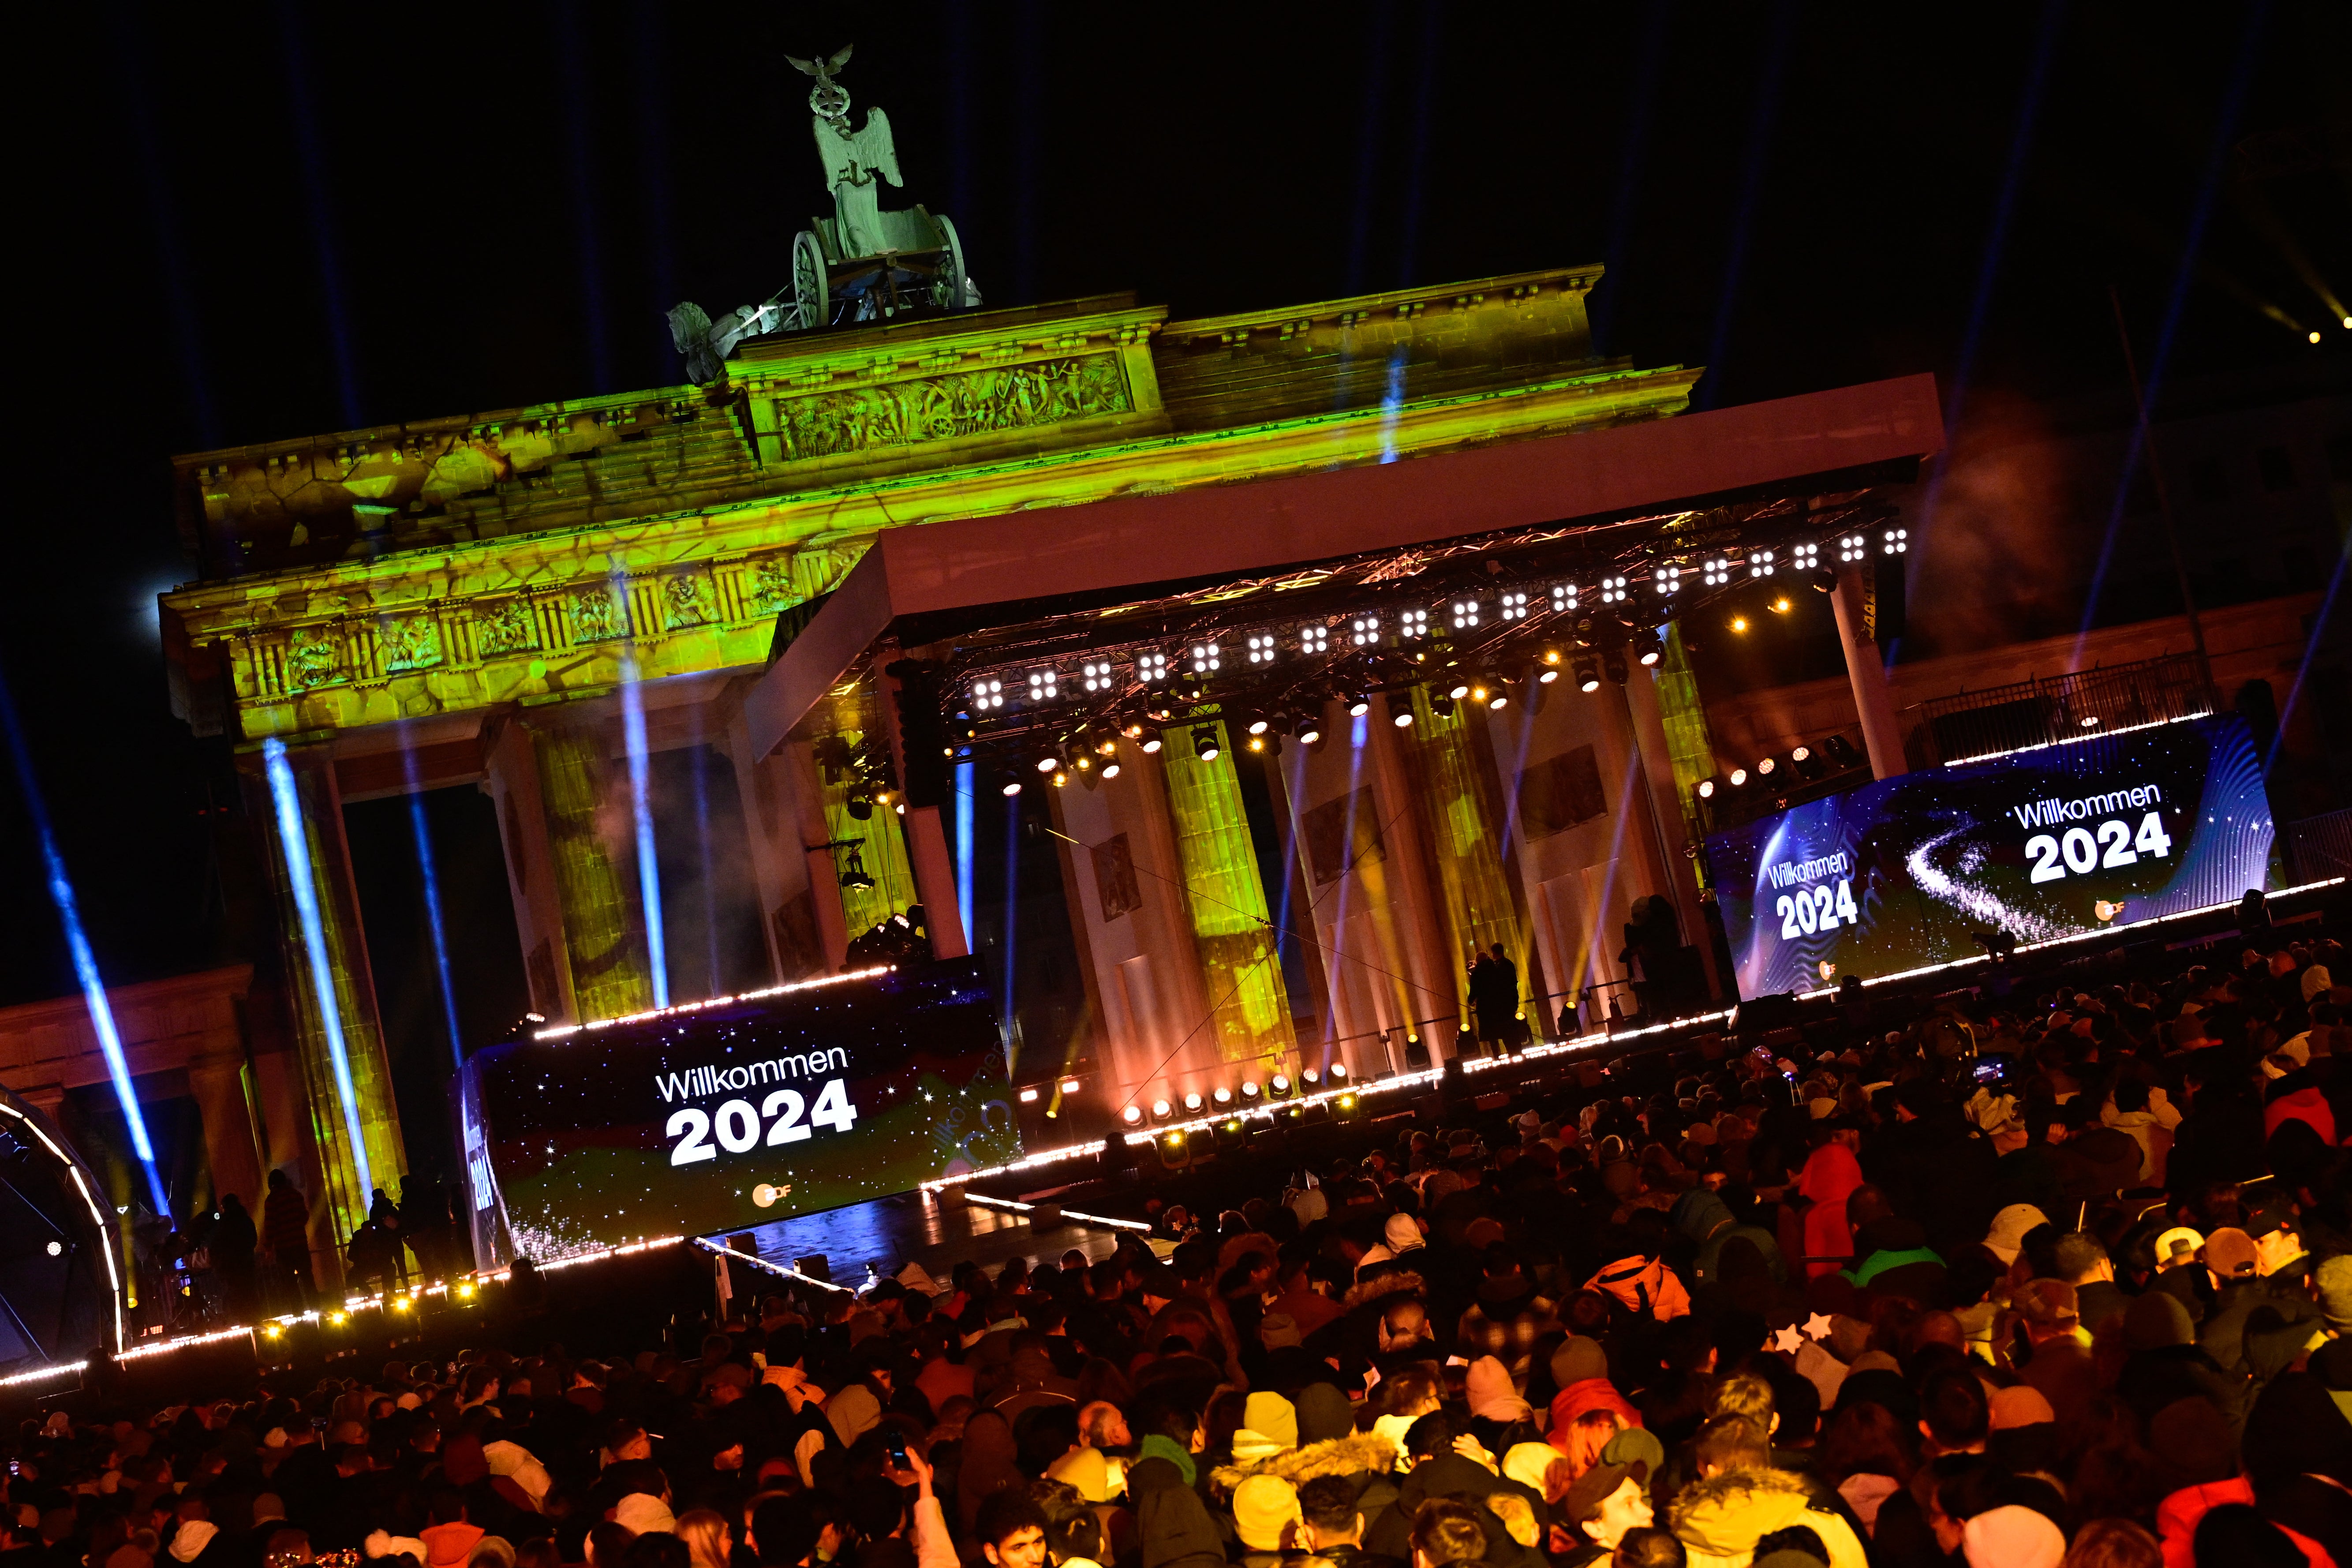 The New Year party in front of the landmark Brandenburg Gate in Berlin